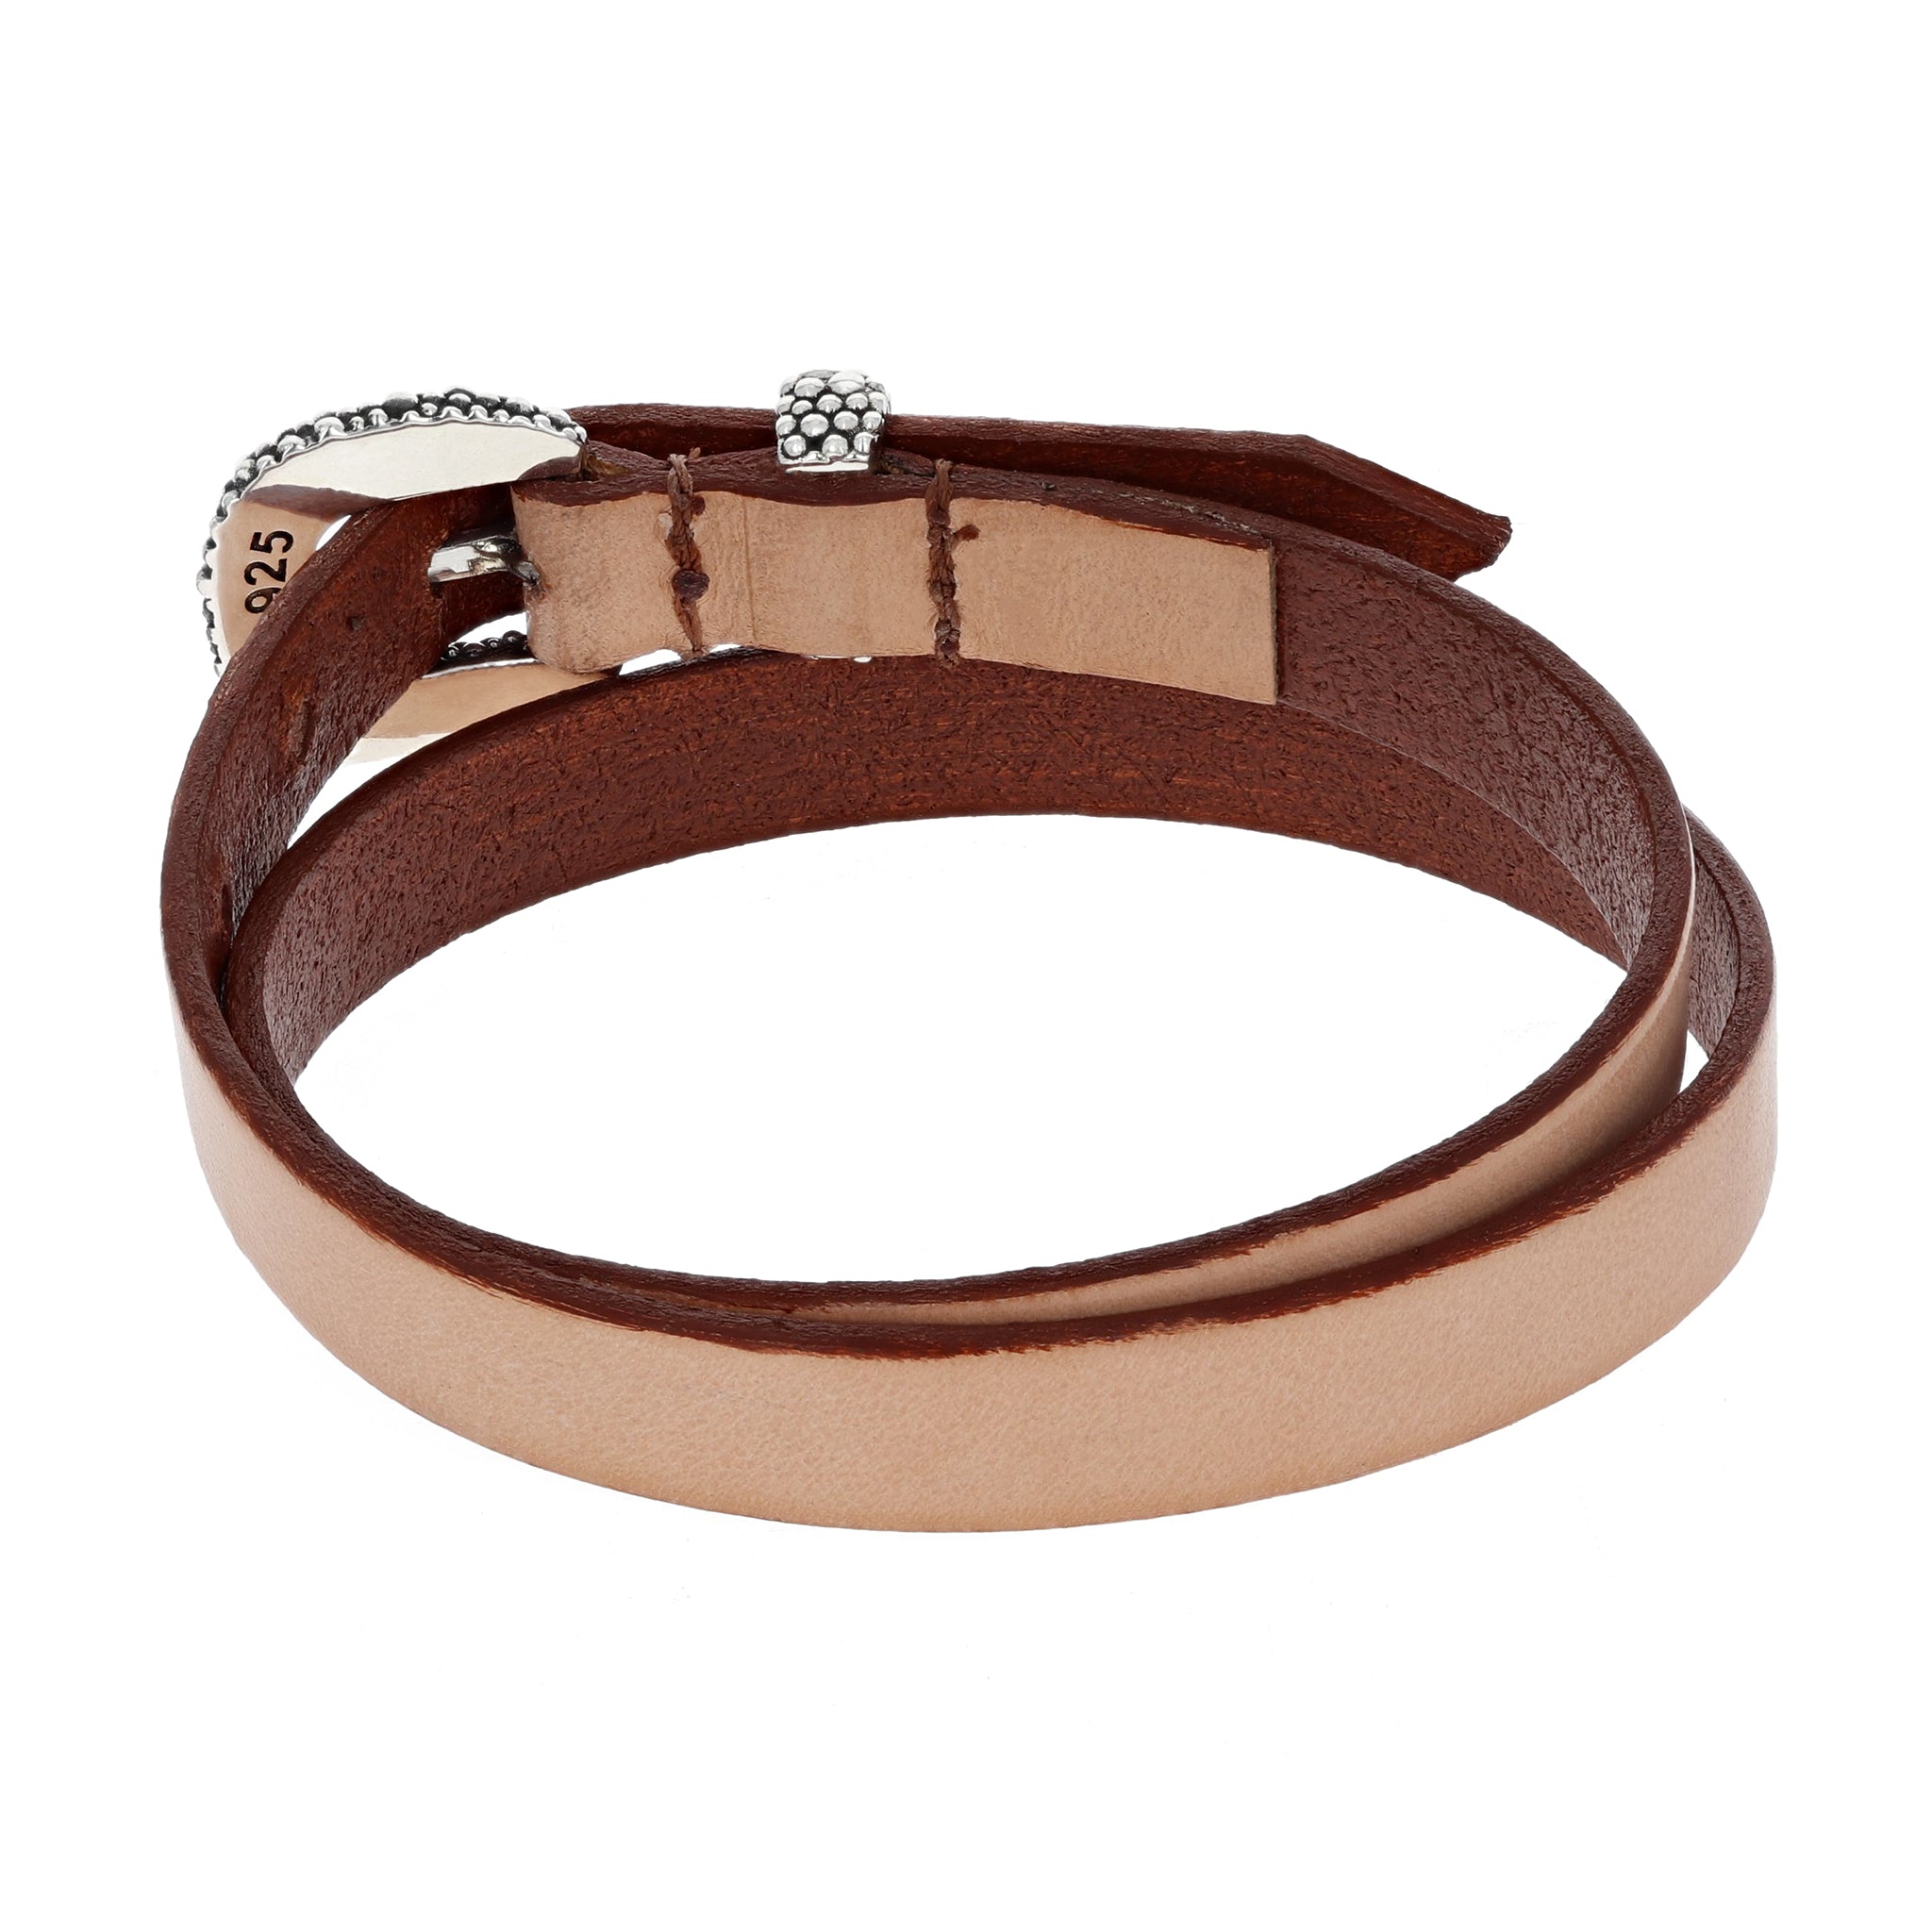 Back View of Brown Double Wrap Leather Bracelet with Silver Stingray Texture Buckle and Keeper